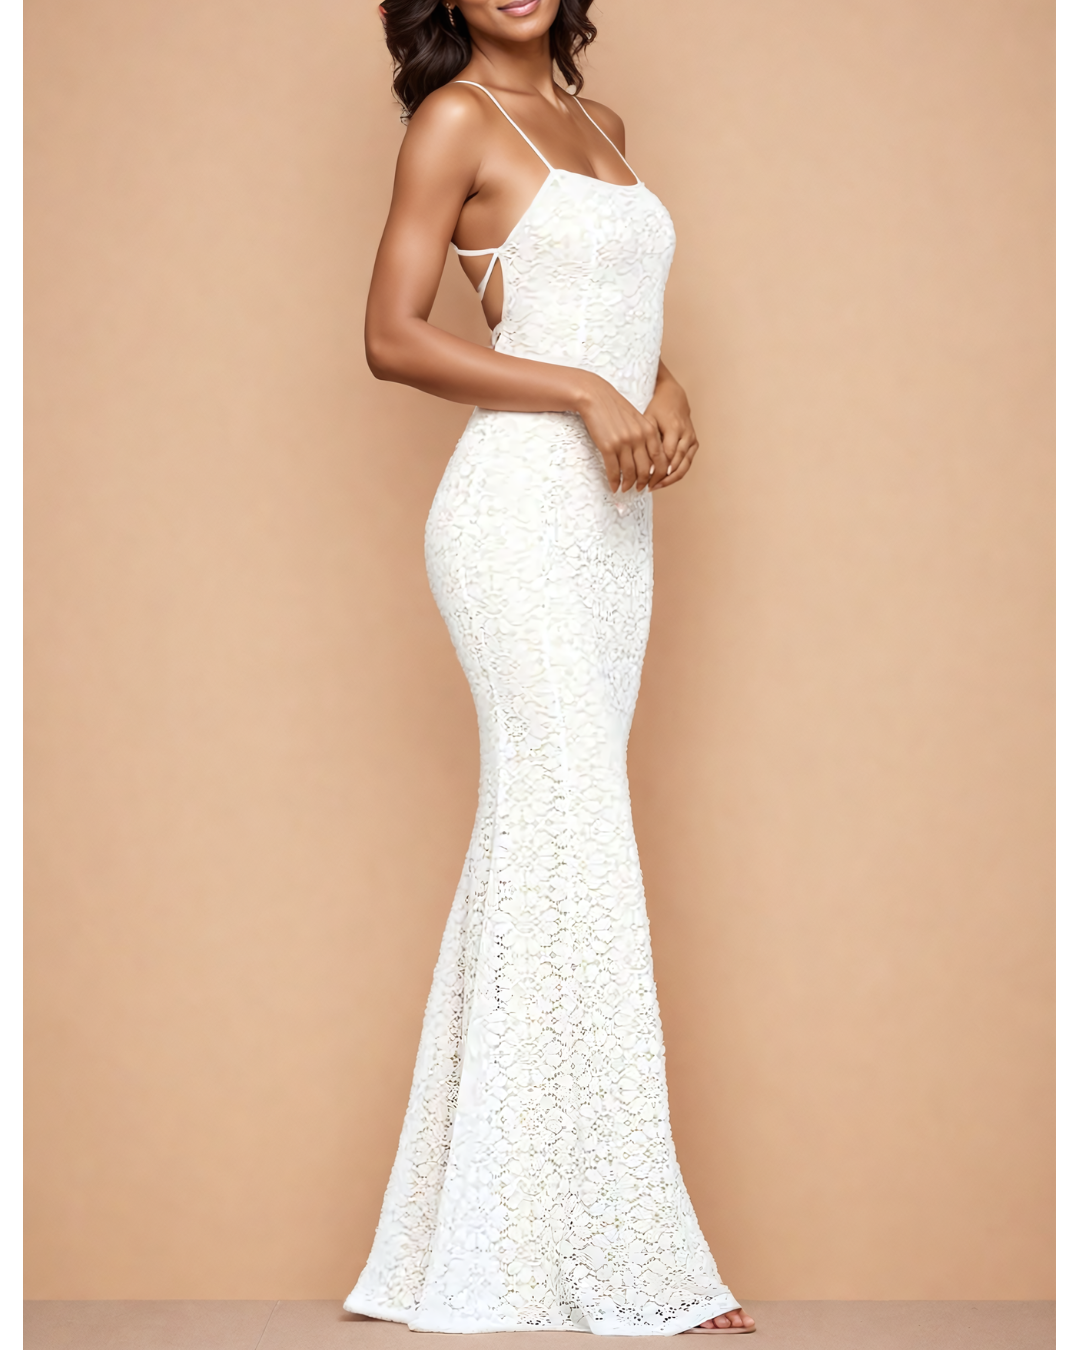 Intricate Lace Mermaid Gown with Open Back Detail - White